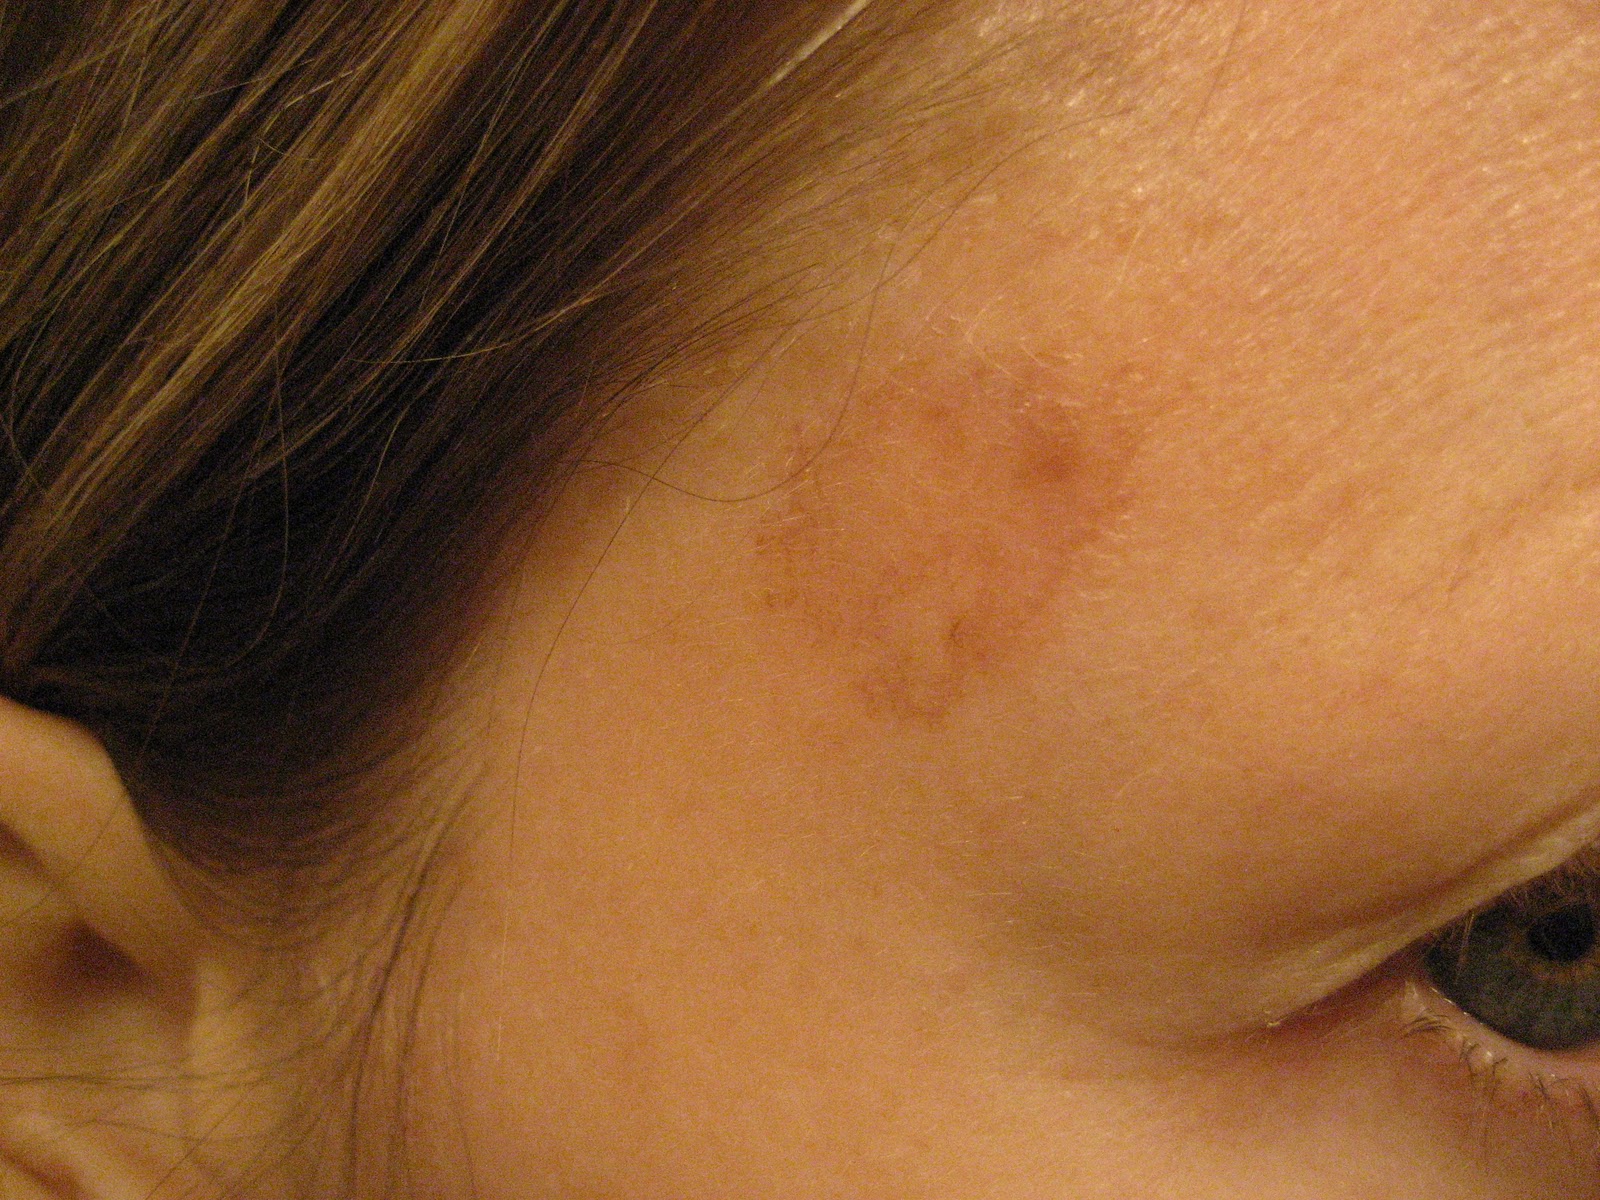 Chemical Peels For Acne And Anti Aging 18 Tca Chemical Peel Day 2